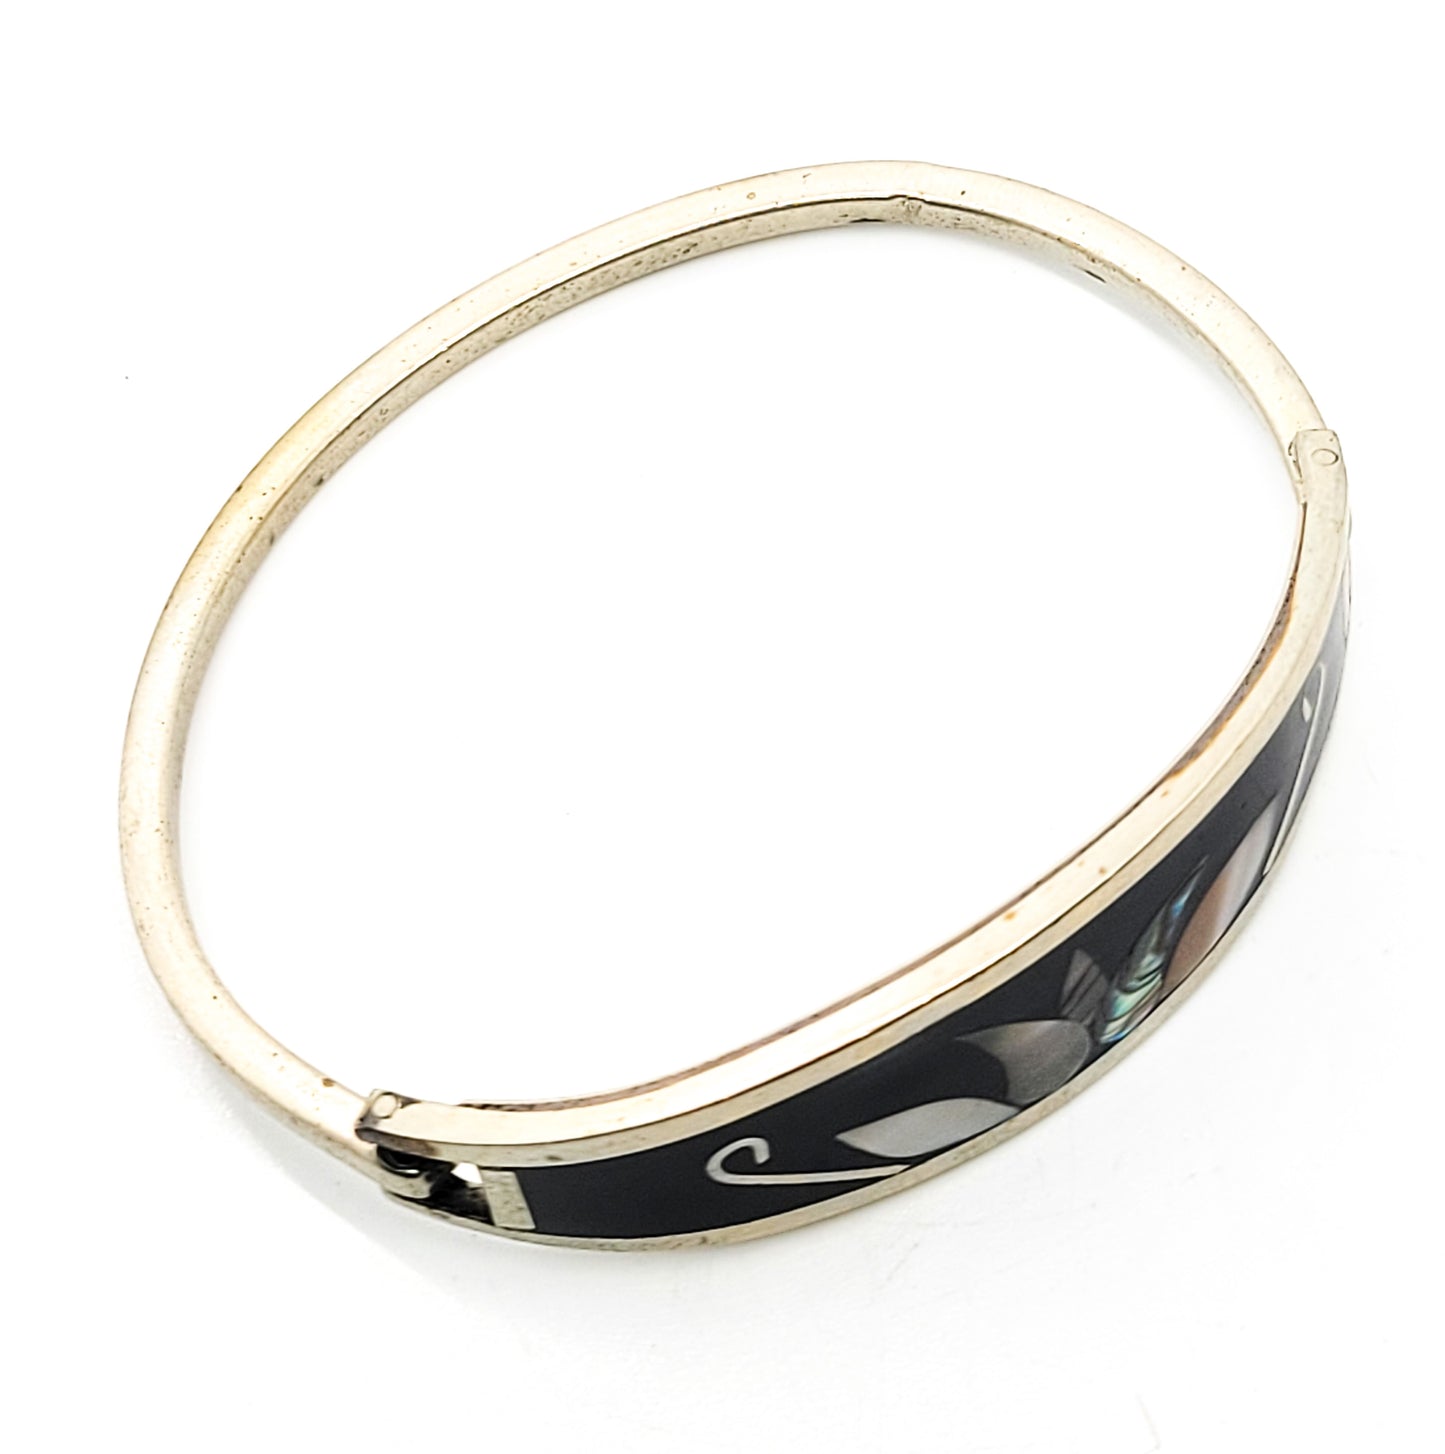 Lotus mother of pearl Abalone black and silver vintage hingled bangle bracelet